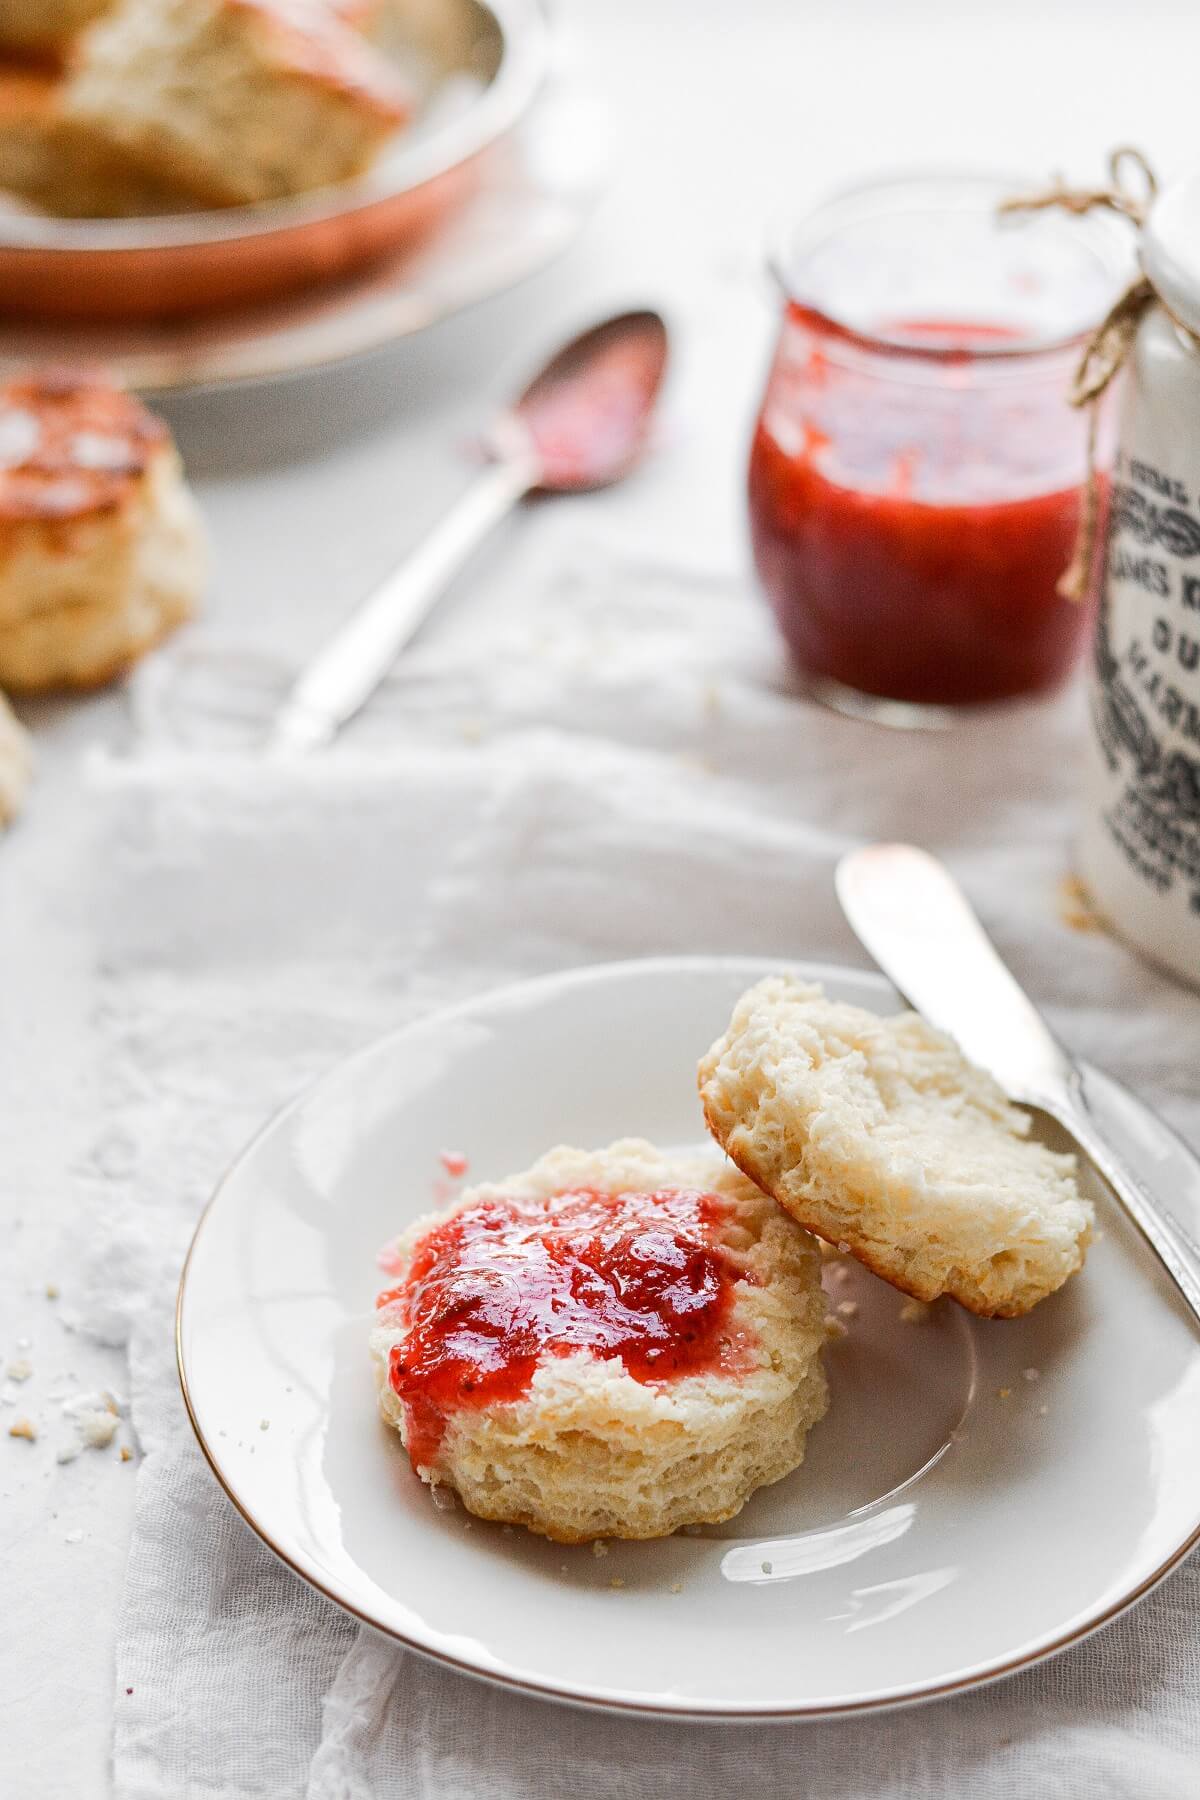 A baking powder biscuit split in half, topped with strawberry rhubarb jam.